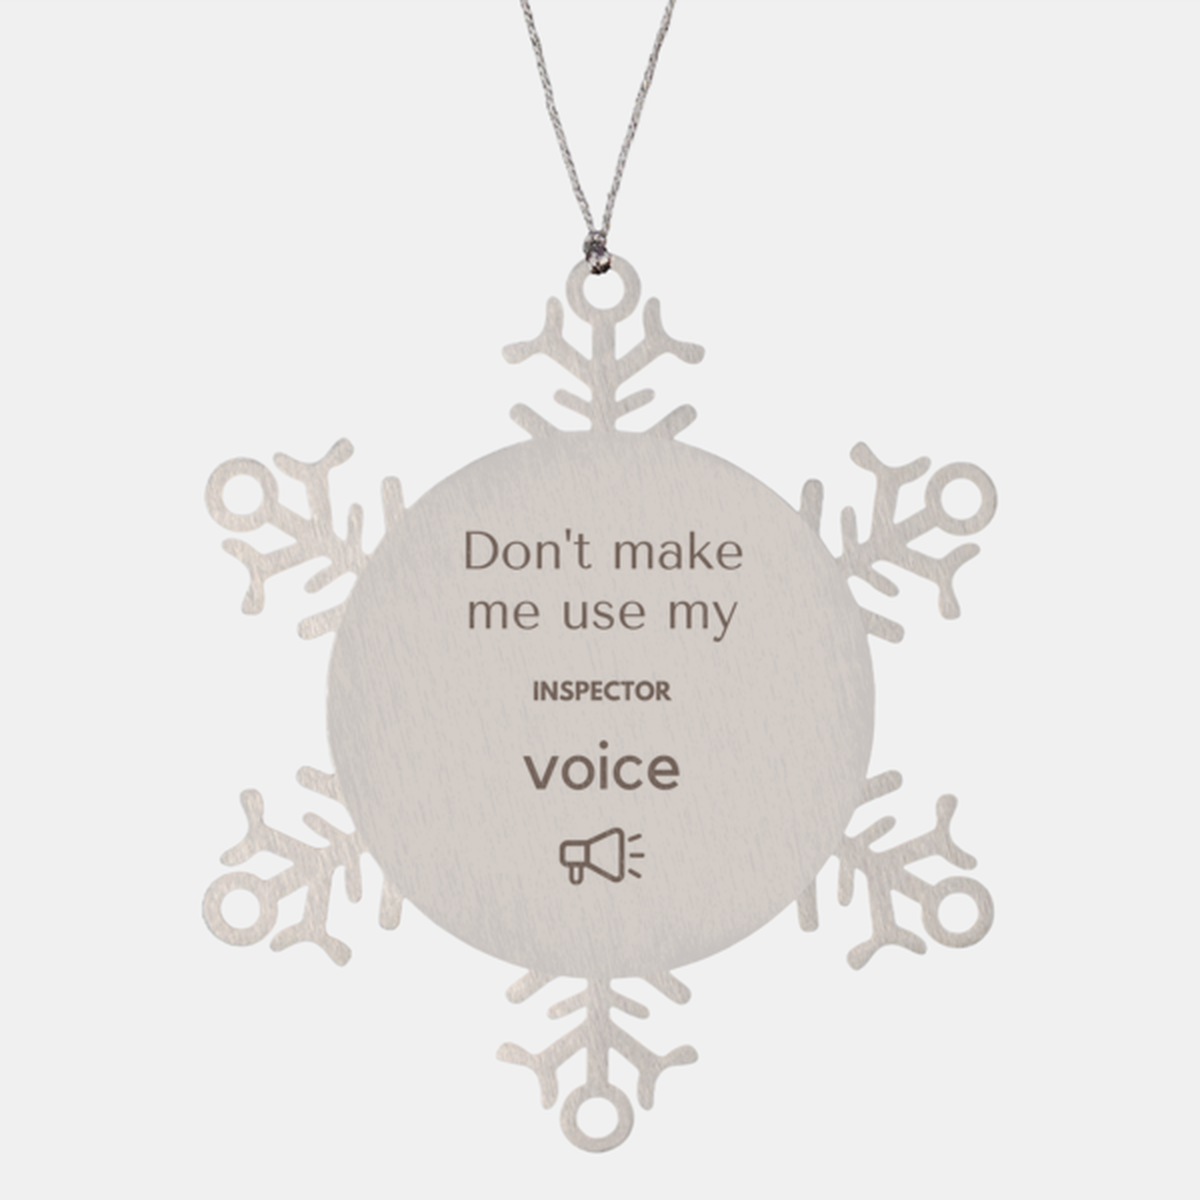 Don't make me use my Inspector voice, Sarcasm Inspector Ornament Gifts, Christmas Inspector Snowflake Ornament Unique Gifts For Inspector Coworkers, Men, Women, Colleague, Friends